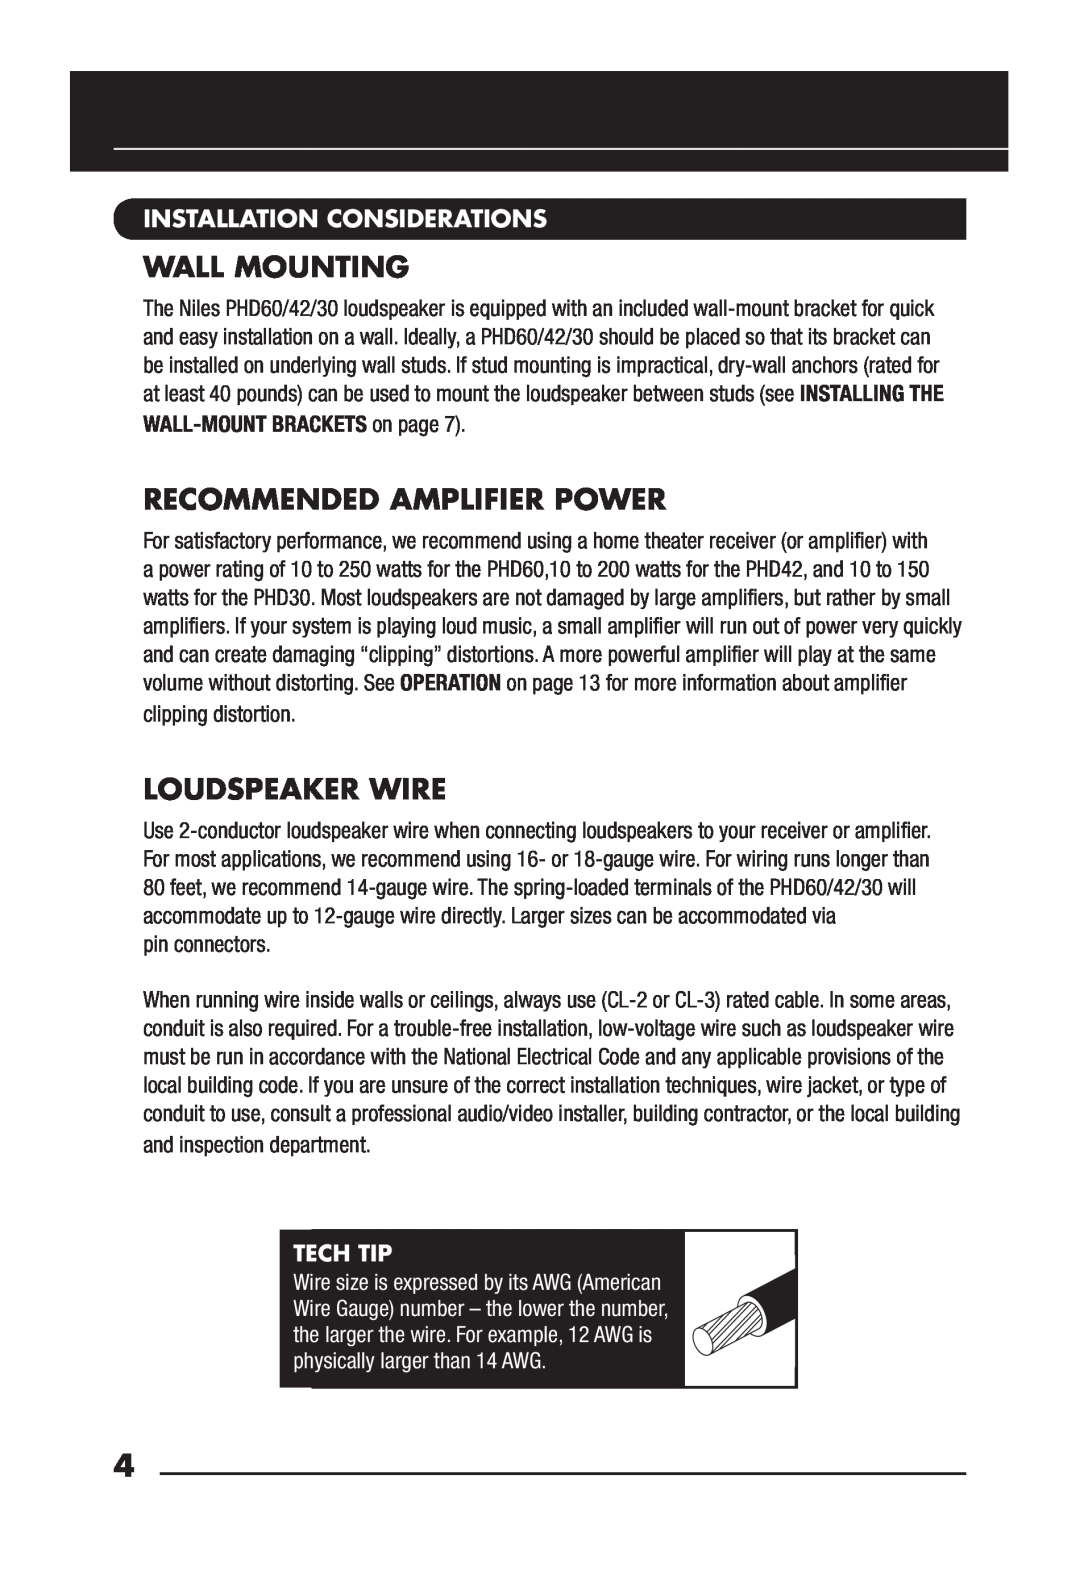 Niles Audio PHD60 Wall Mounting, Recommended Amplifier Power, Loudspeaker Wire, Installation Considerations, Tech Tip 